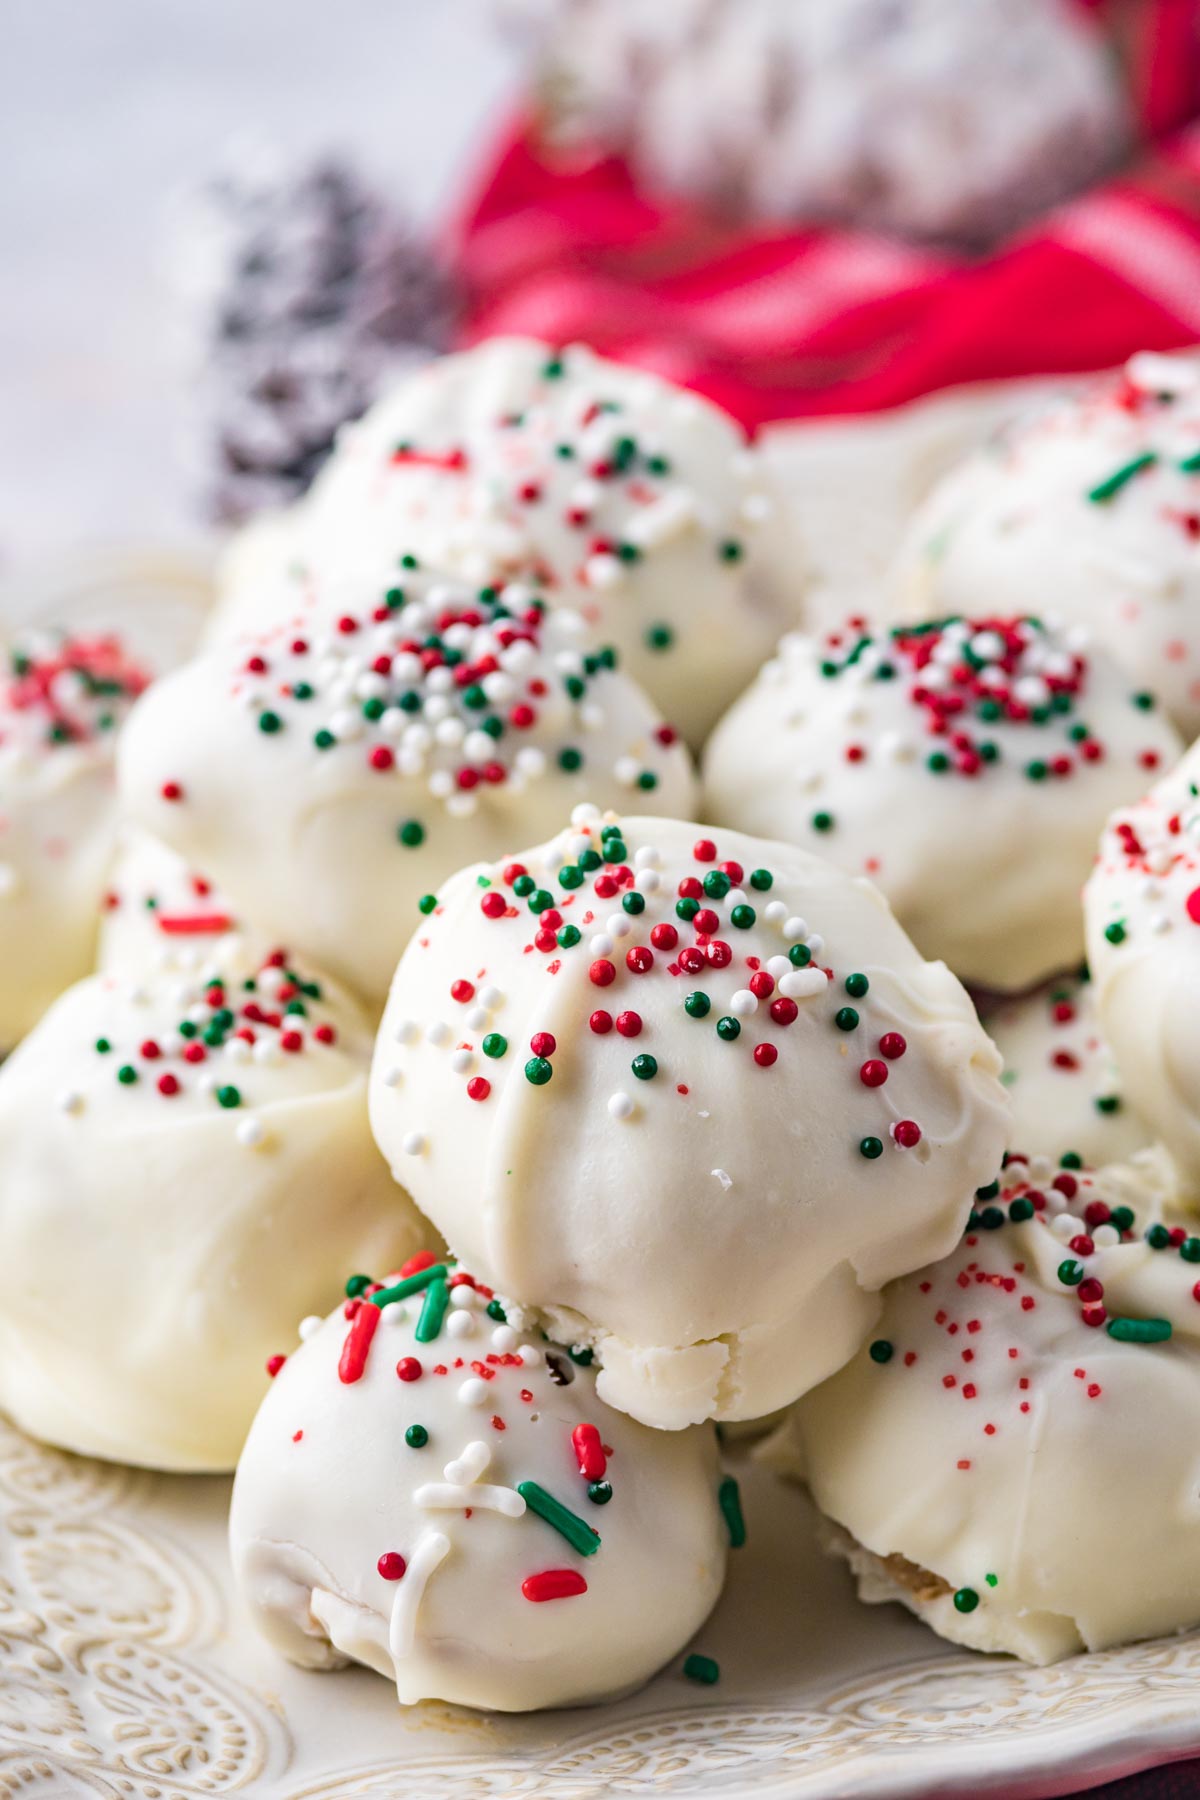 Pile of white chocolate peanut butter snowballs